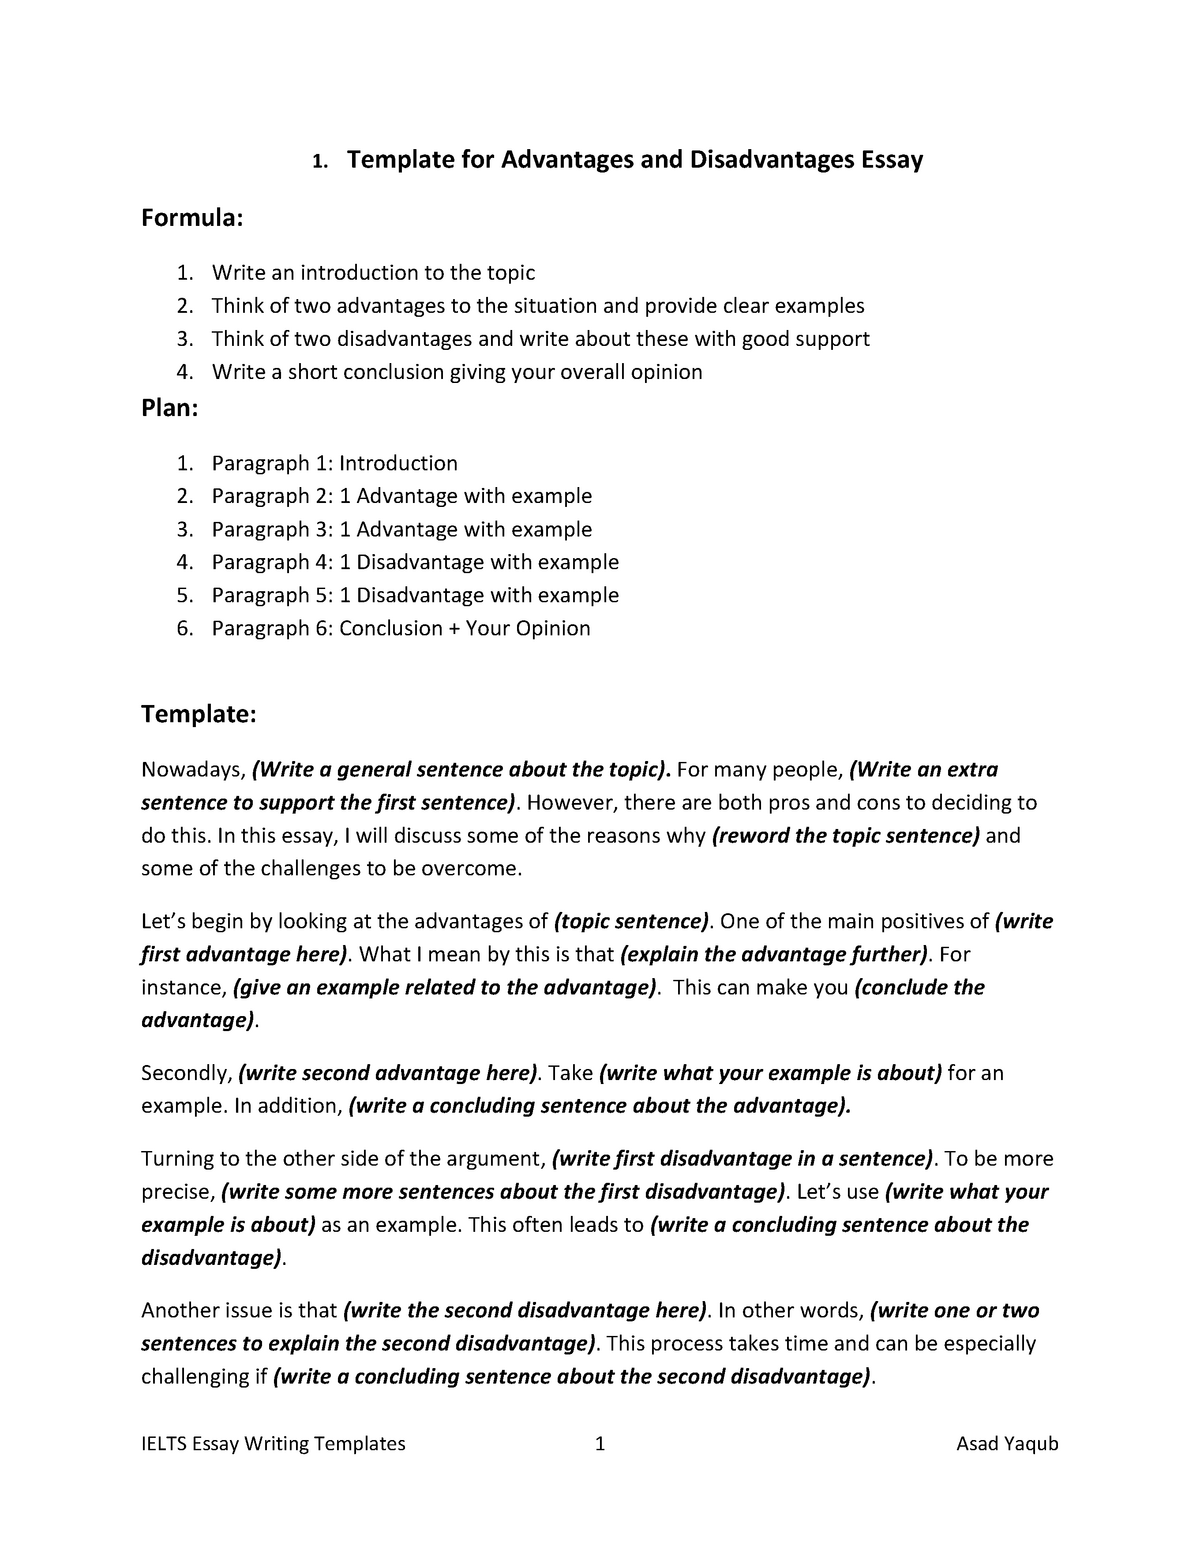 Templates for All Ielts Essays Types - 26. Template for Advantages